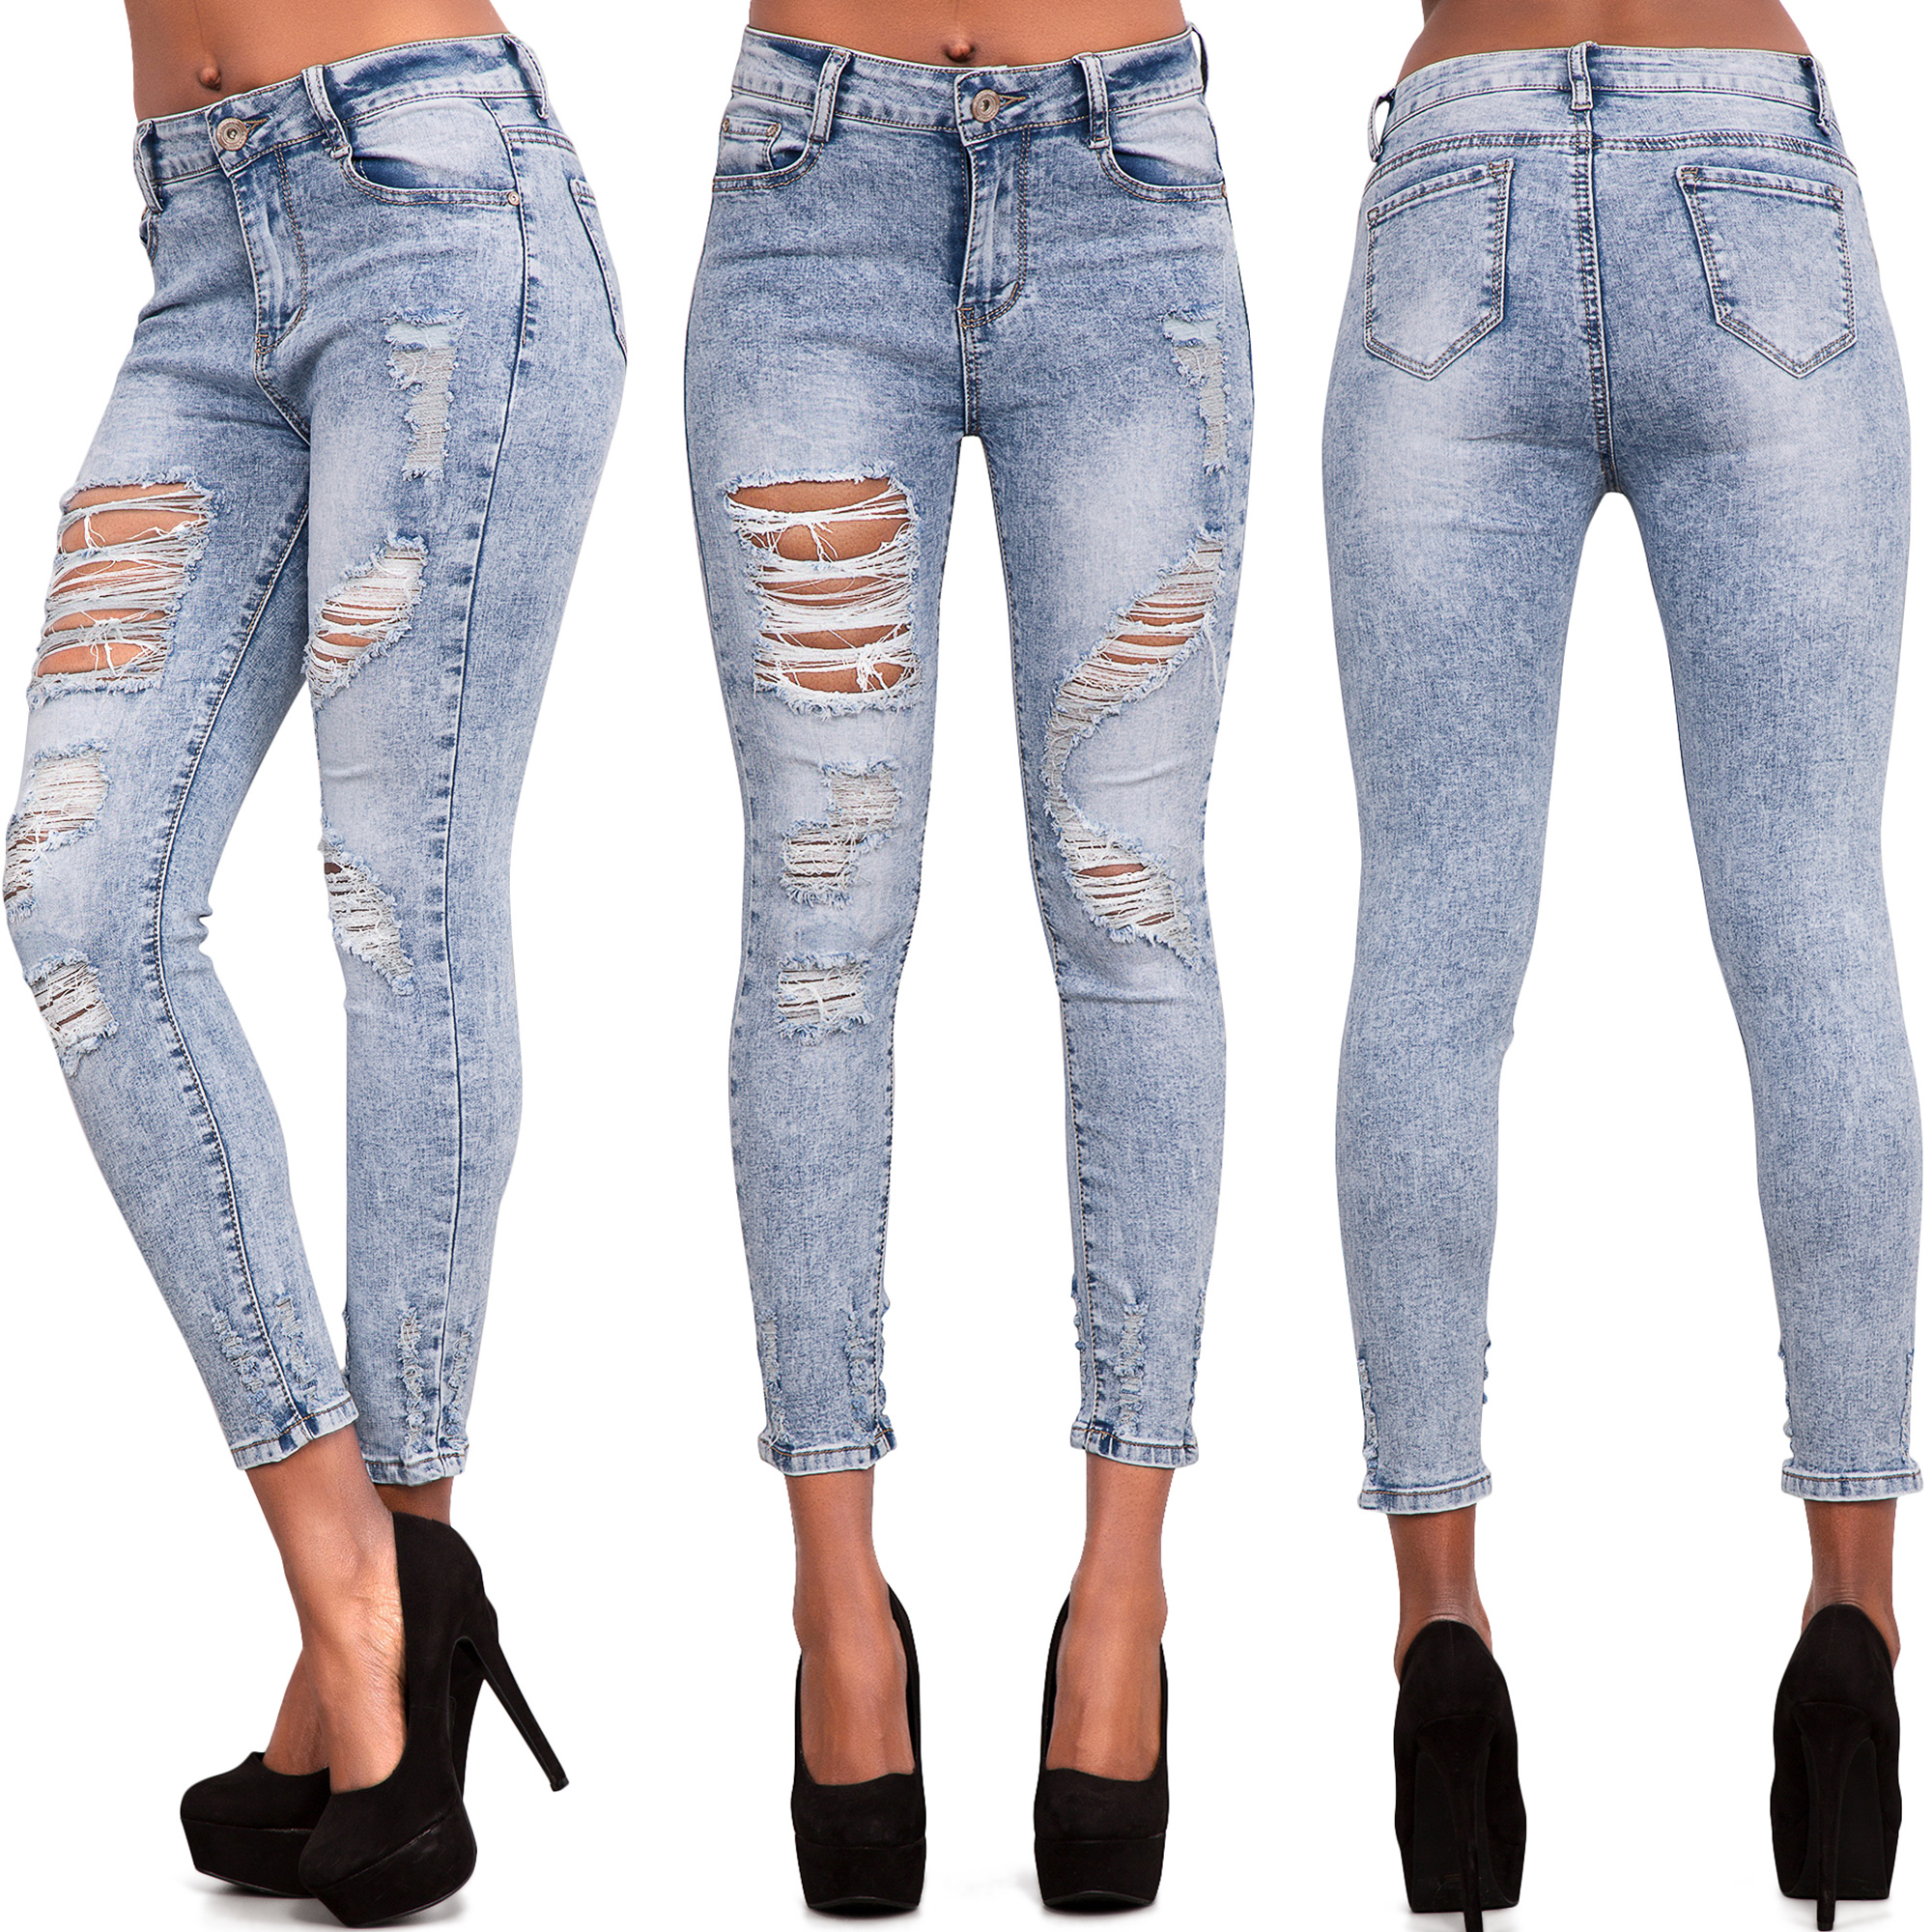 New Womens Ladies Skinny Fit Ripped Jeans Faded Stretchy Denim Size 6 14 Ebay